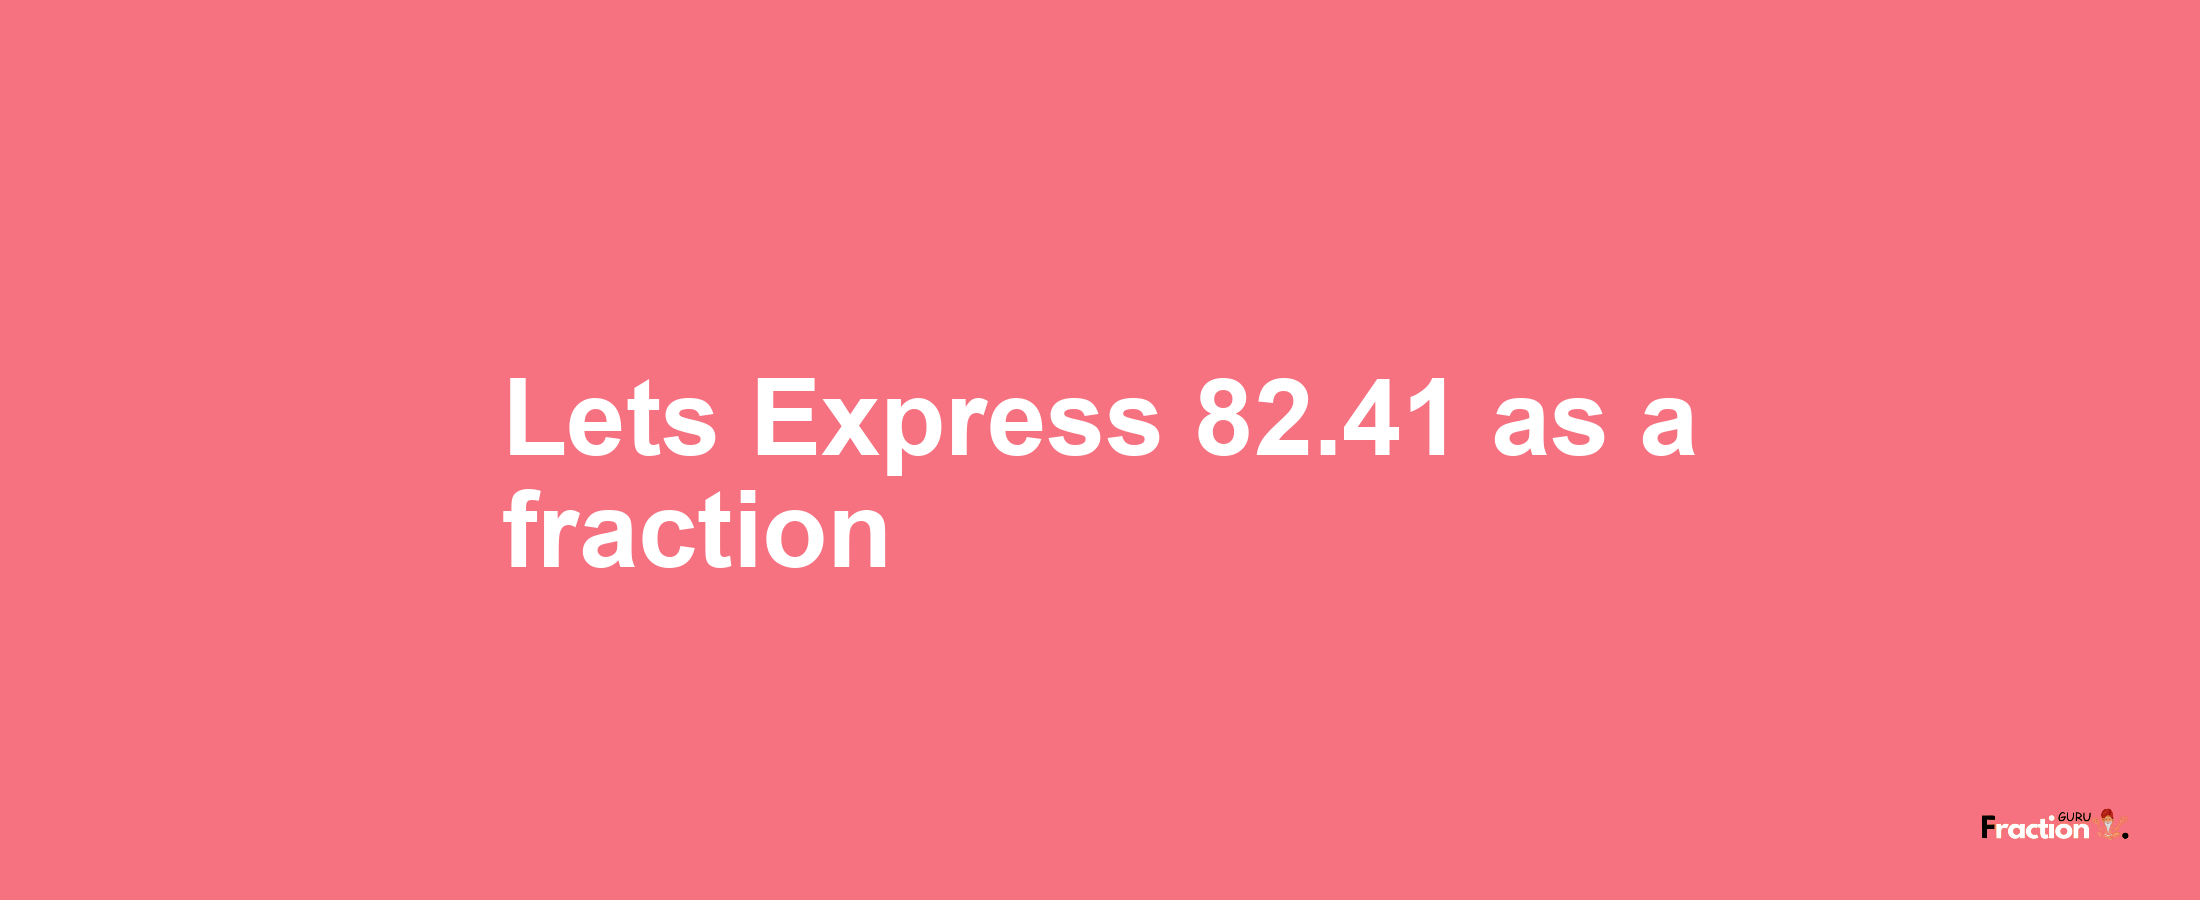 Lets Express 82.41 as afraction